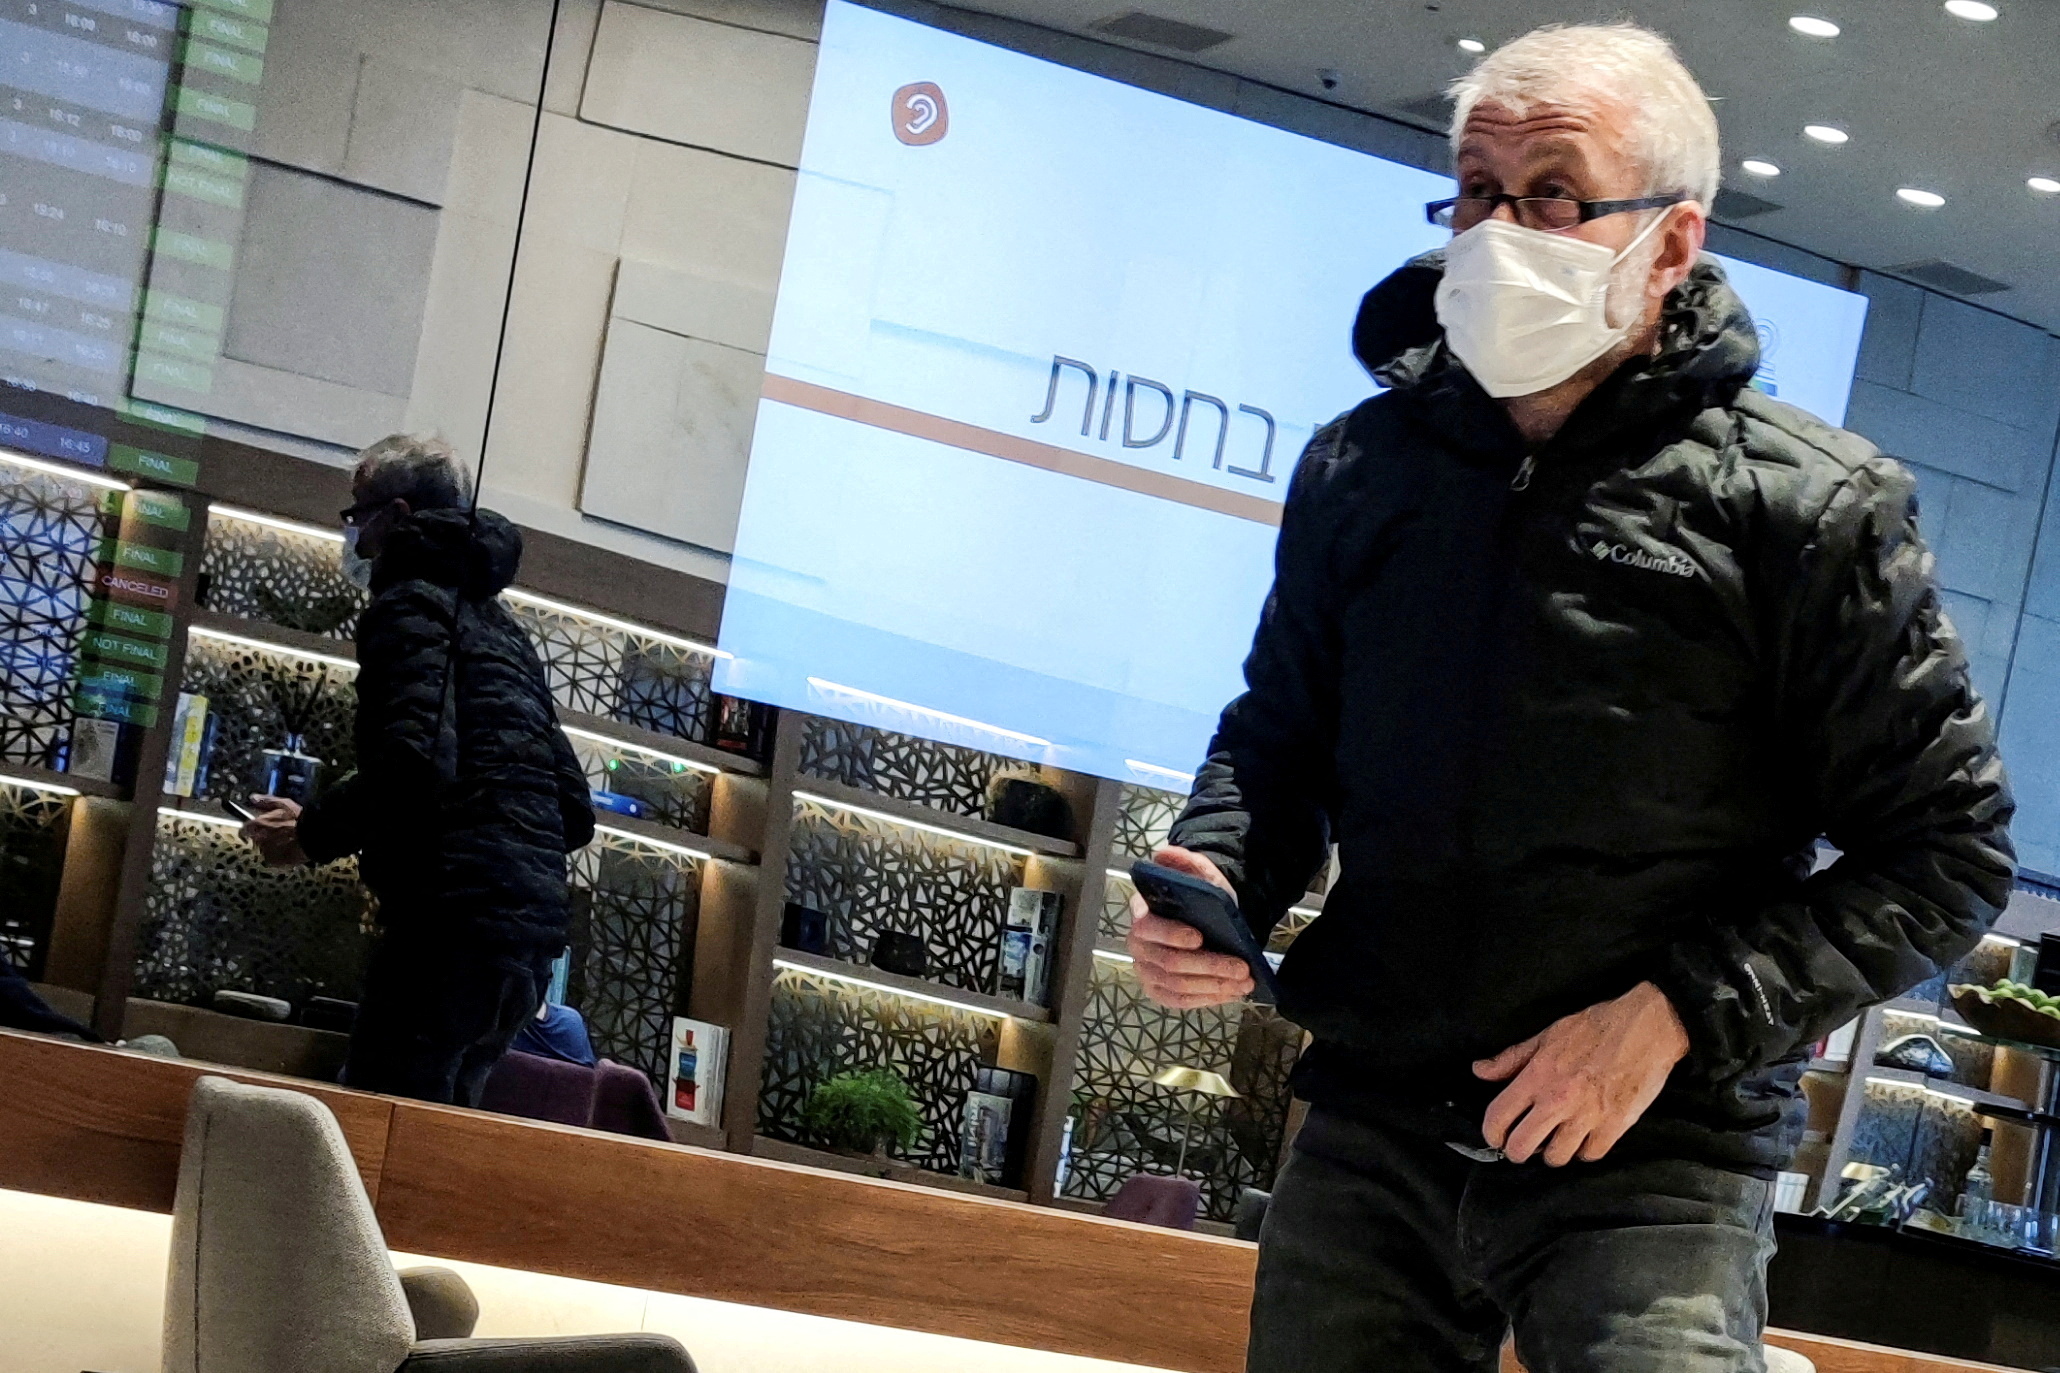 Russian oligarch Roman Abramovich is seen in a VIP lounge at Ben Gurion international airport in Israel